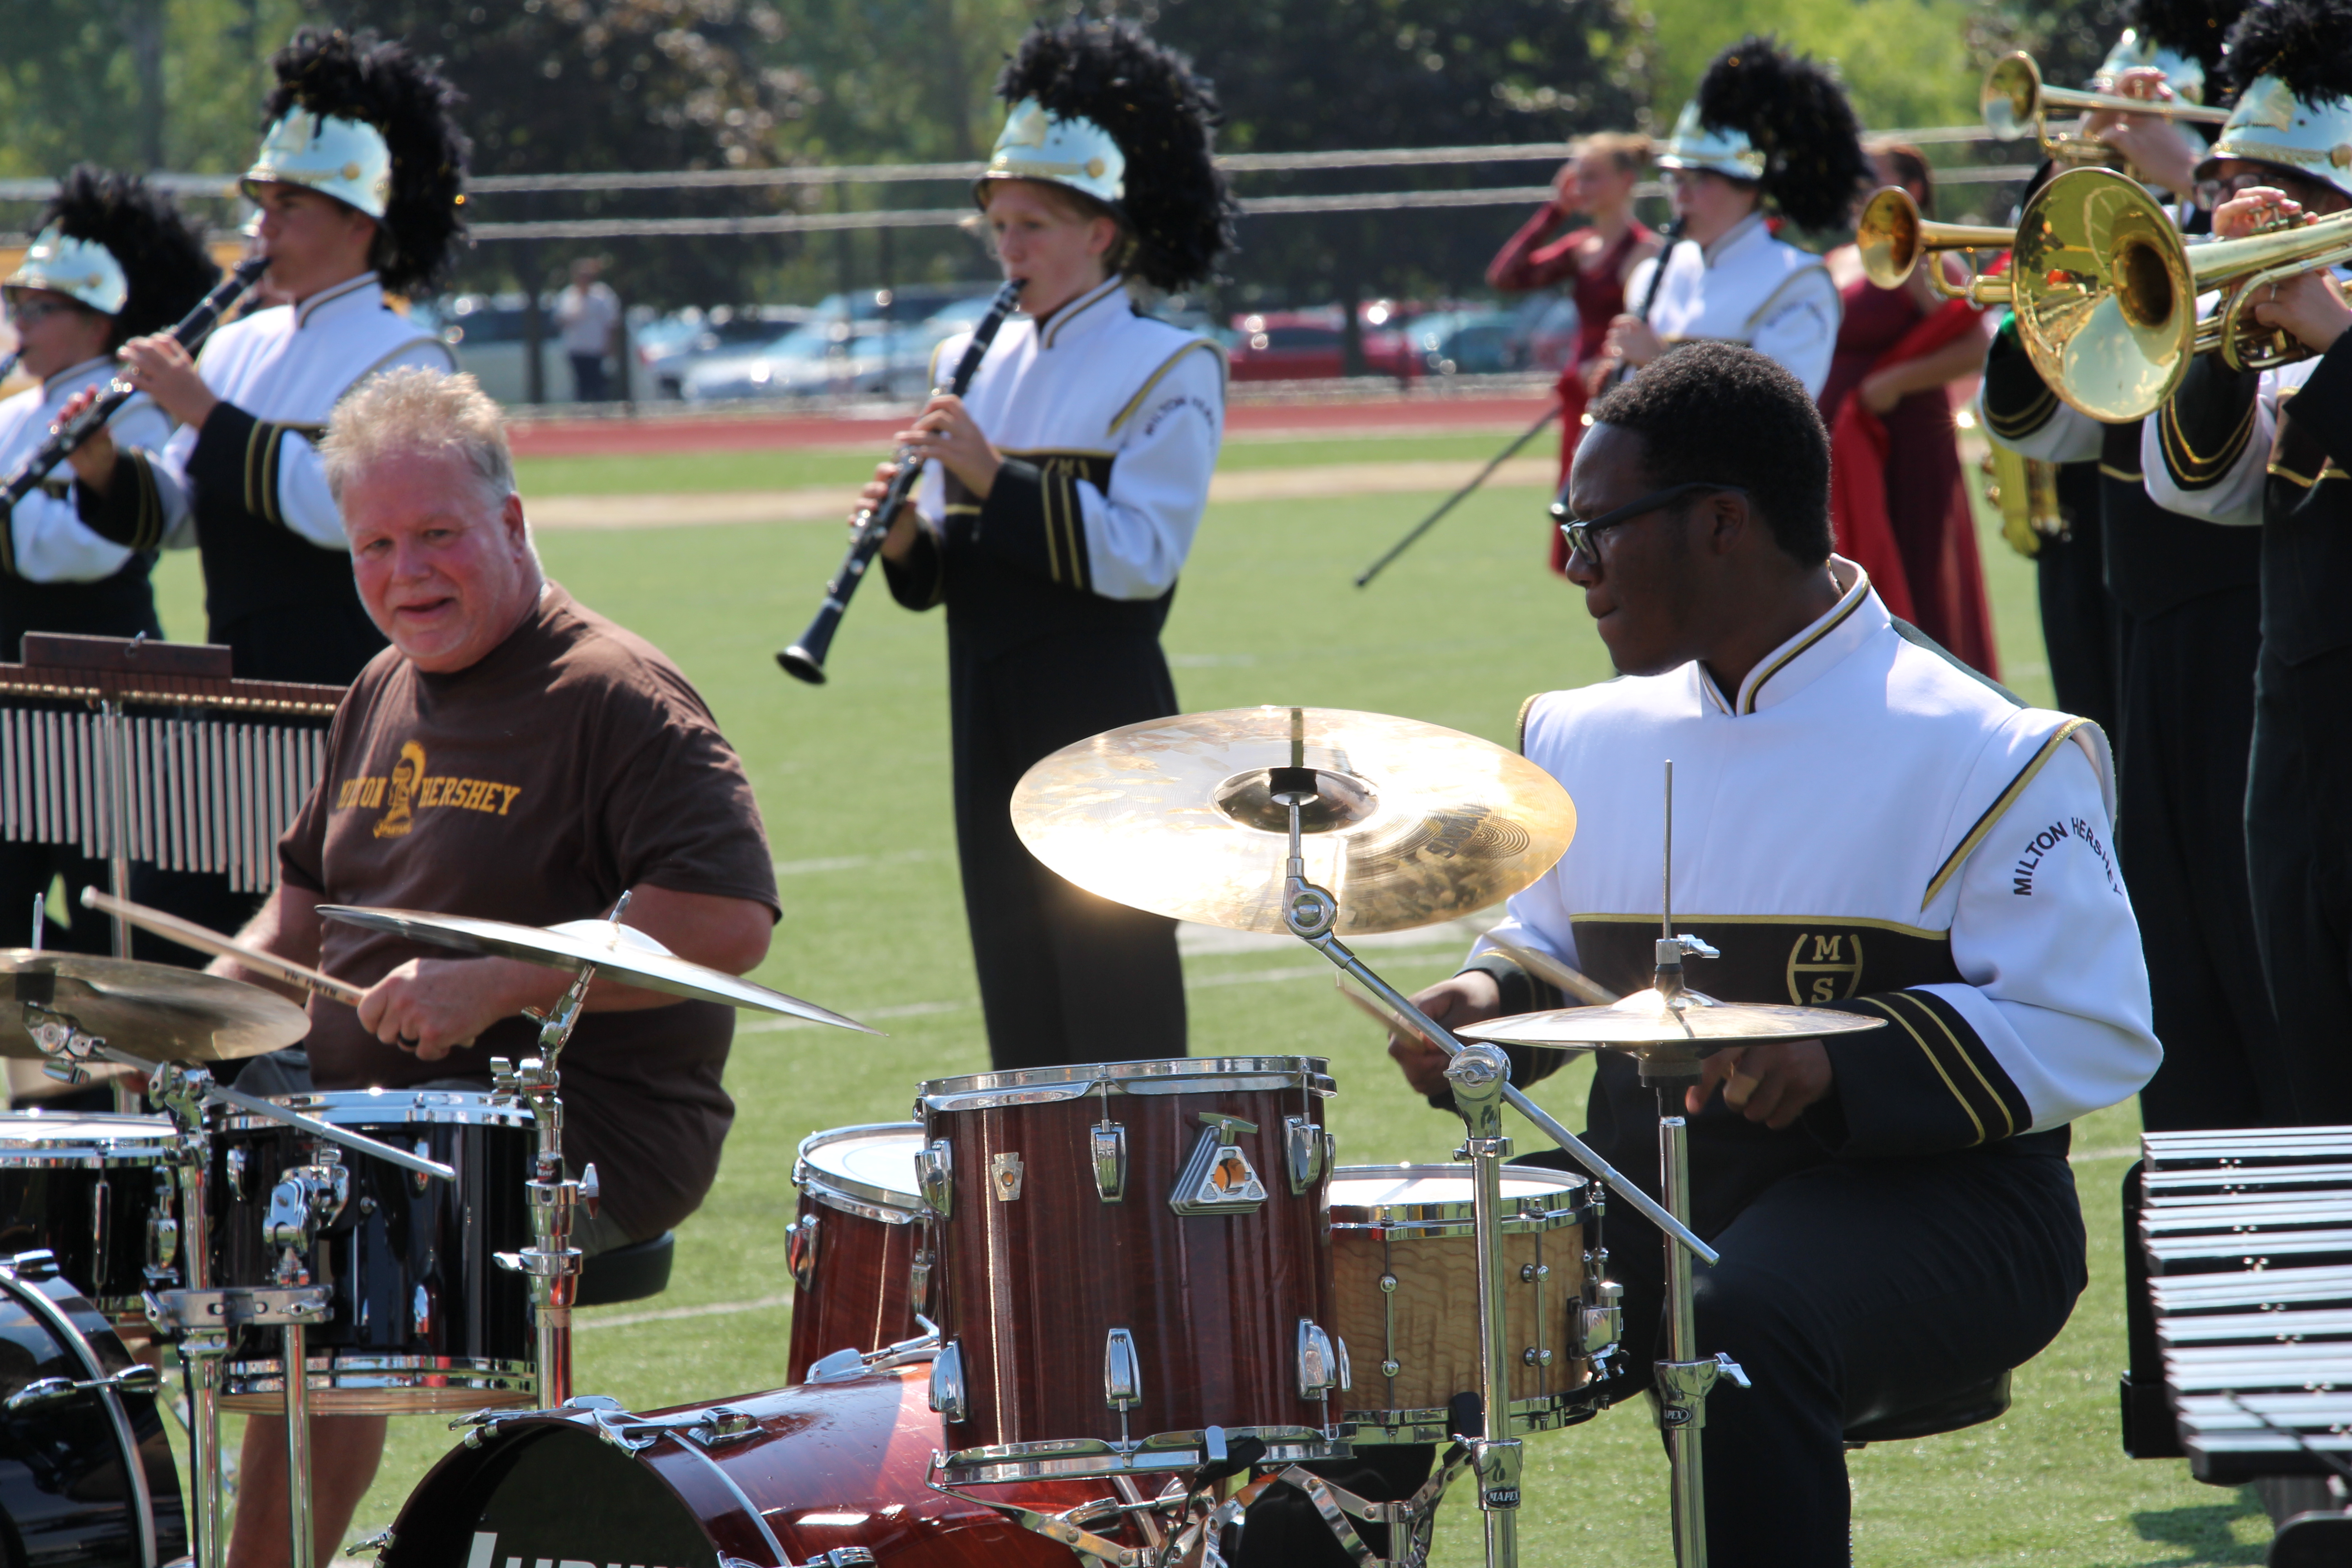 Andre Sumler drumming in marching band.